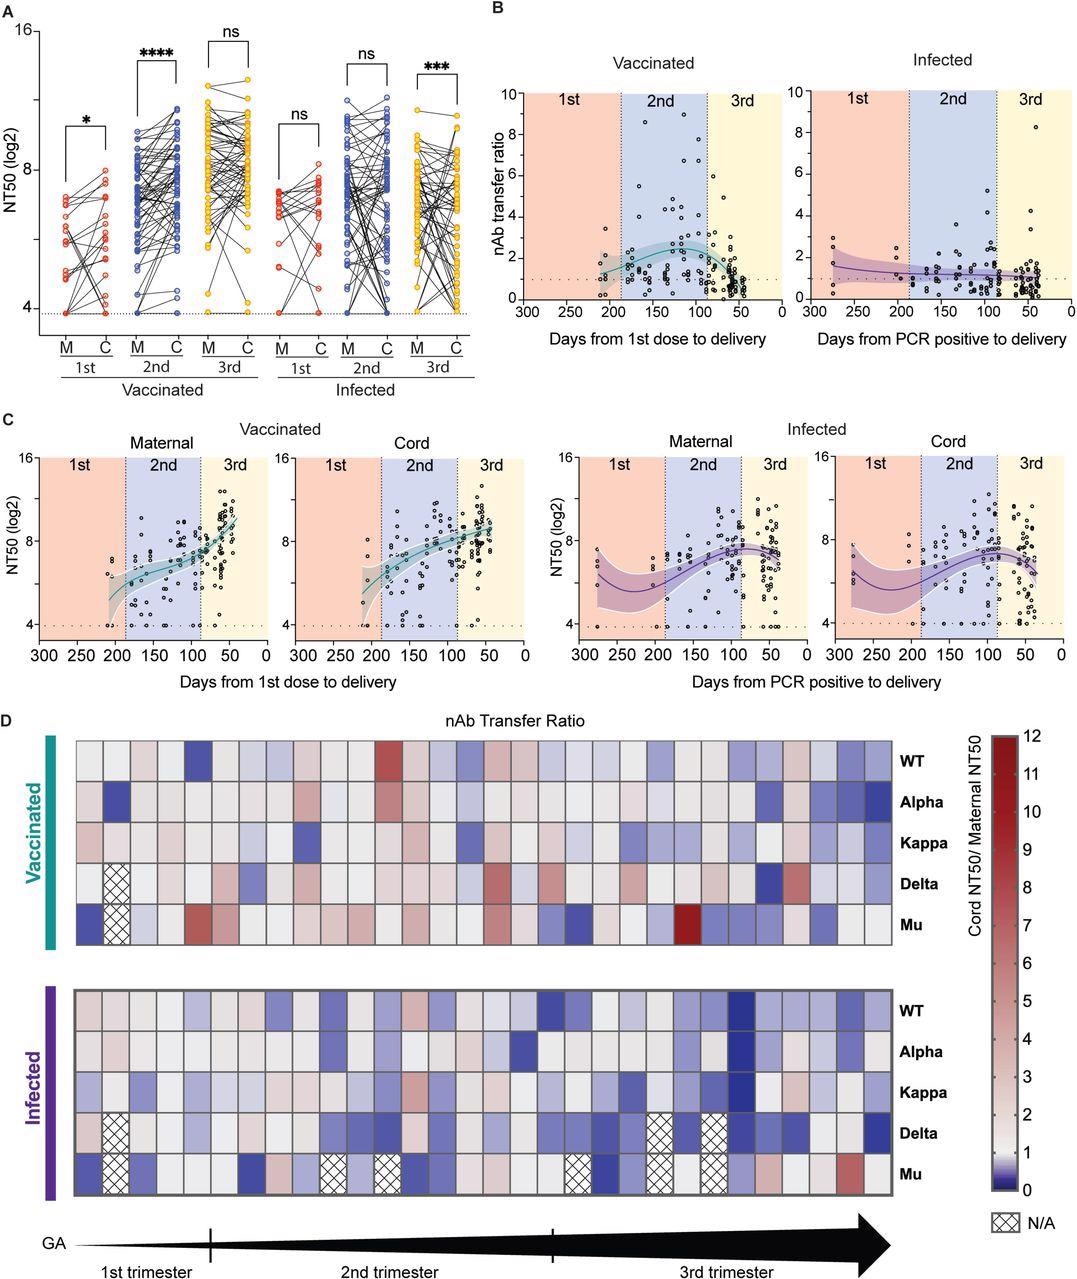 Placental Transfer of SARS-CoV-2 Antibodies. (A) The effect of trimester on antibody transfer. The dot plots show NT50 titers for a cohort of vaccinated maternal-cord pairs. Three separate analyses were performed on the trimester at time of first exposure (Red, first trimester; blue, second trimester; yellow, third trimester). Lines connect mother:cord dyads. Significance was determined by the Wilcoxon signed-rank test. (B) Maternal-cord transfer ratios (TR) of nAbs were calculated by cord NT50/maternal NT50 to assess efficiency of nAb transfer. nAb TRs are shown by timing on the first vaccine dose or the first positive PCR result. Correlations between the cord to maternal nAb ratio and days from events were analyzed using non-linear regression analysis. (C) Maternal and cord NT50 values were shown by timing on the first vaccine dose or the first positive PCR result. (D) Patient based nAb TRs for each SARS-CoV-2 strain in both vaccinated and infected patients. All patients were ordered according to increasing gestational age (GA) within their groups. N/A, samples are not enough. *P < 0.05; ***P < 0.001; ****P < 0.0001; ns, not significant.